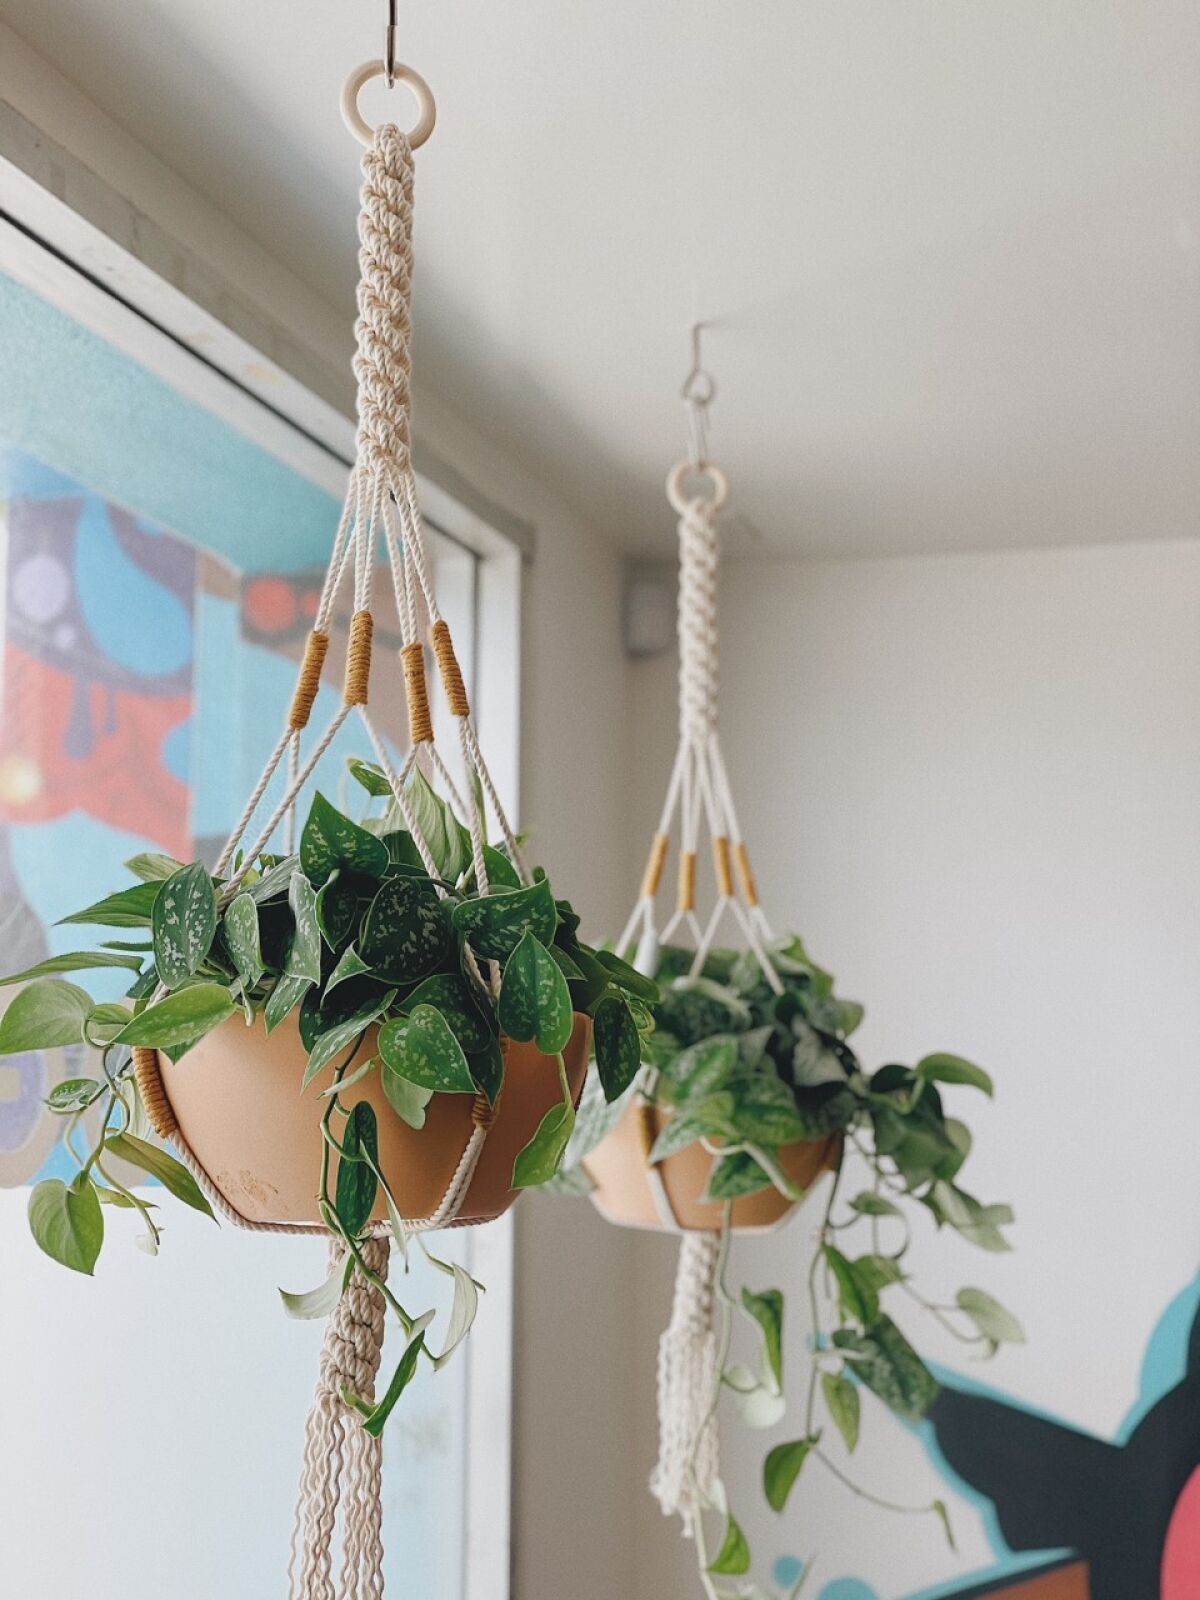 Two potted plants in plant hangers made from woven white rope. 